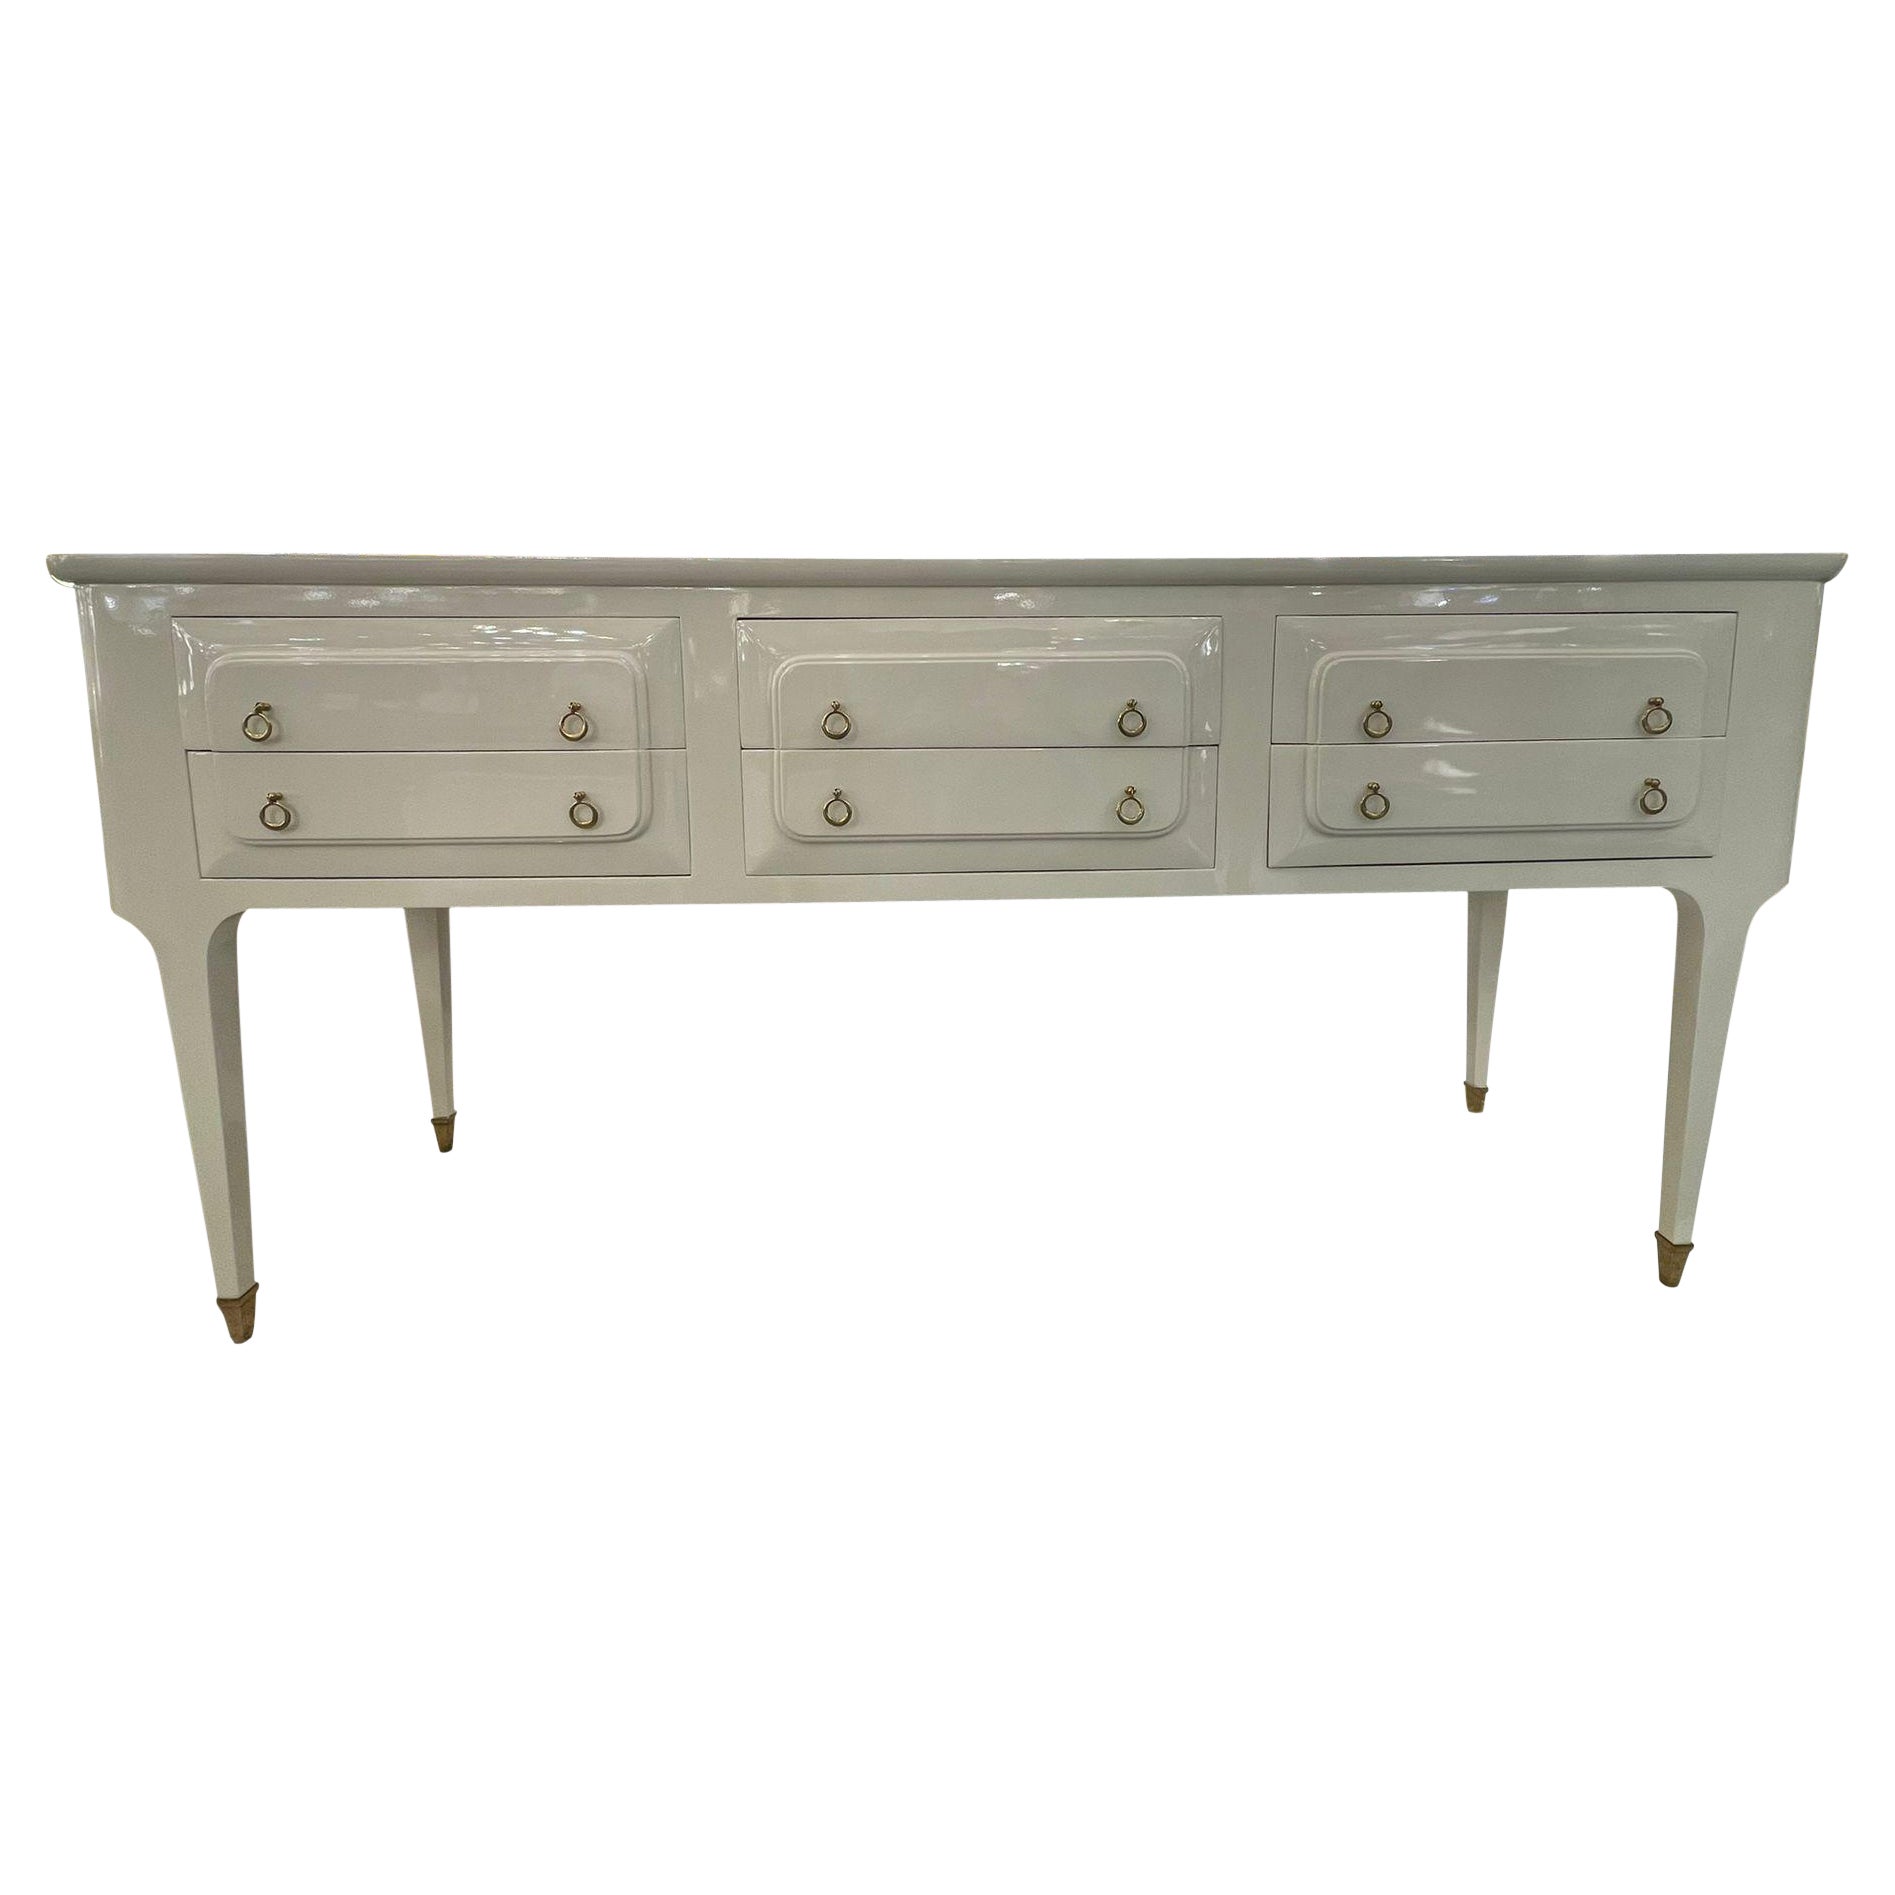 Italian Mid-Century Sideboard in Ivory Lacquered Wood, circa 1950s For Sale